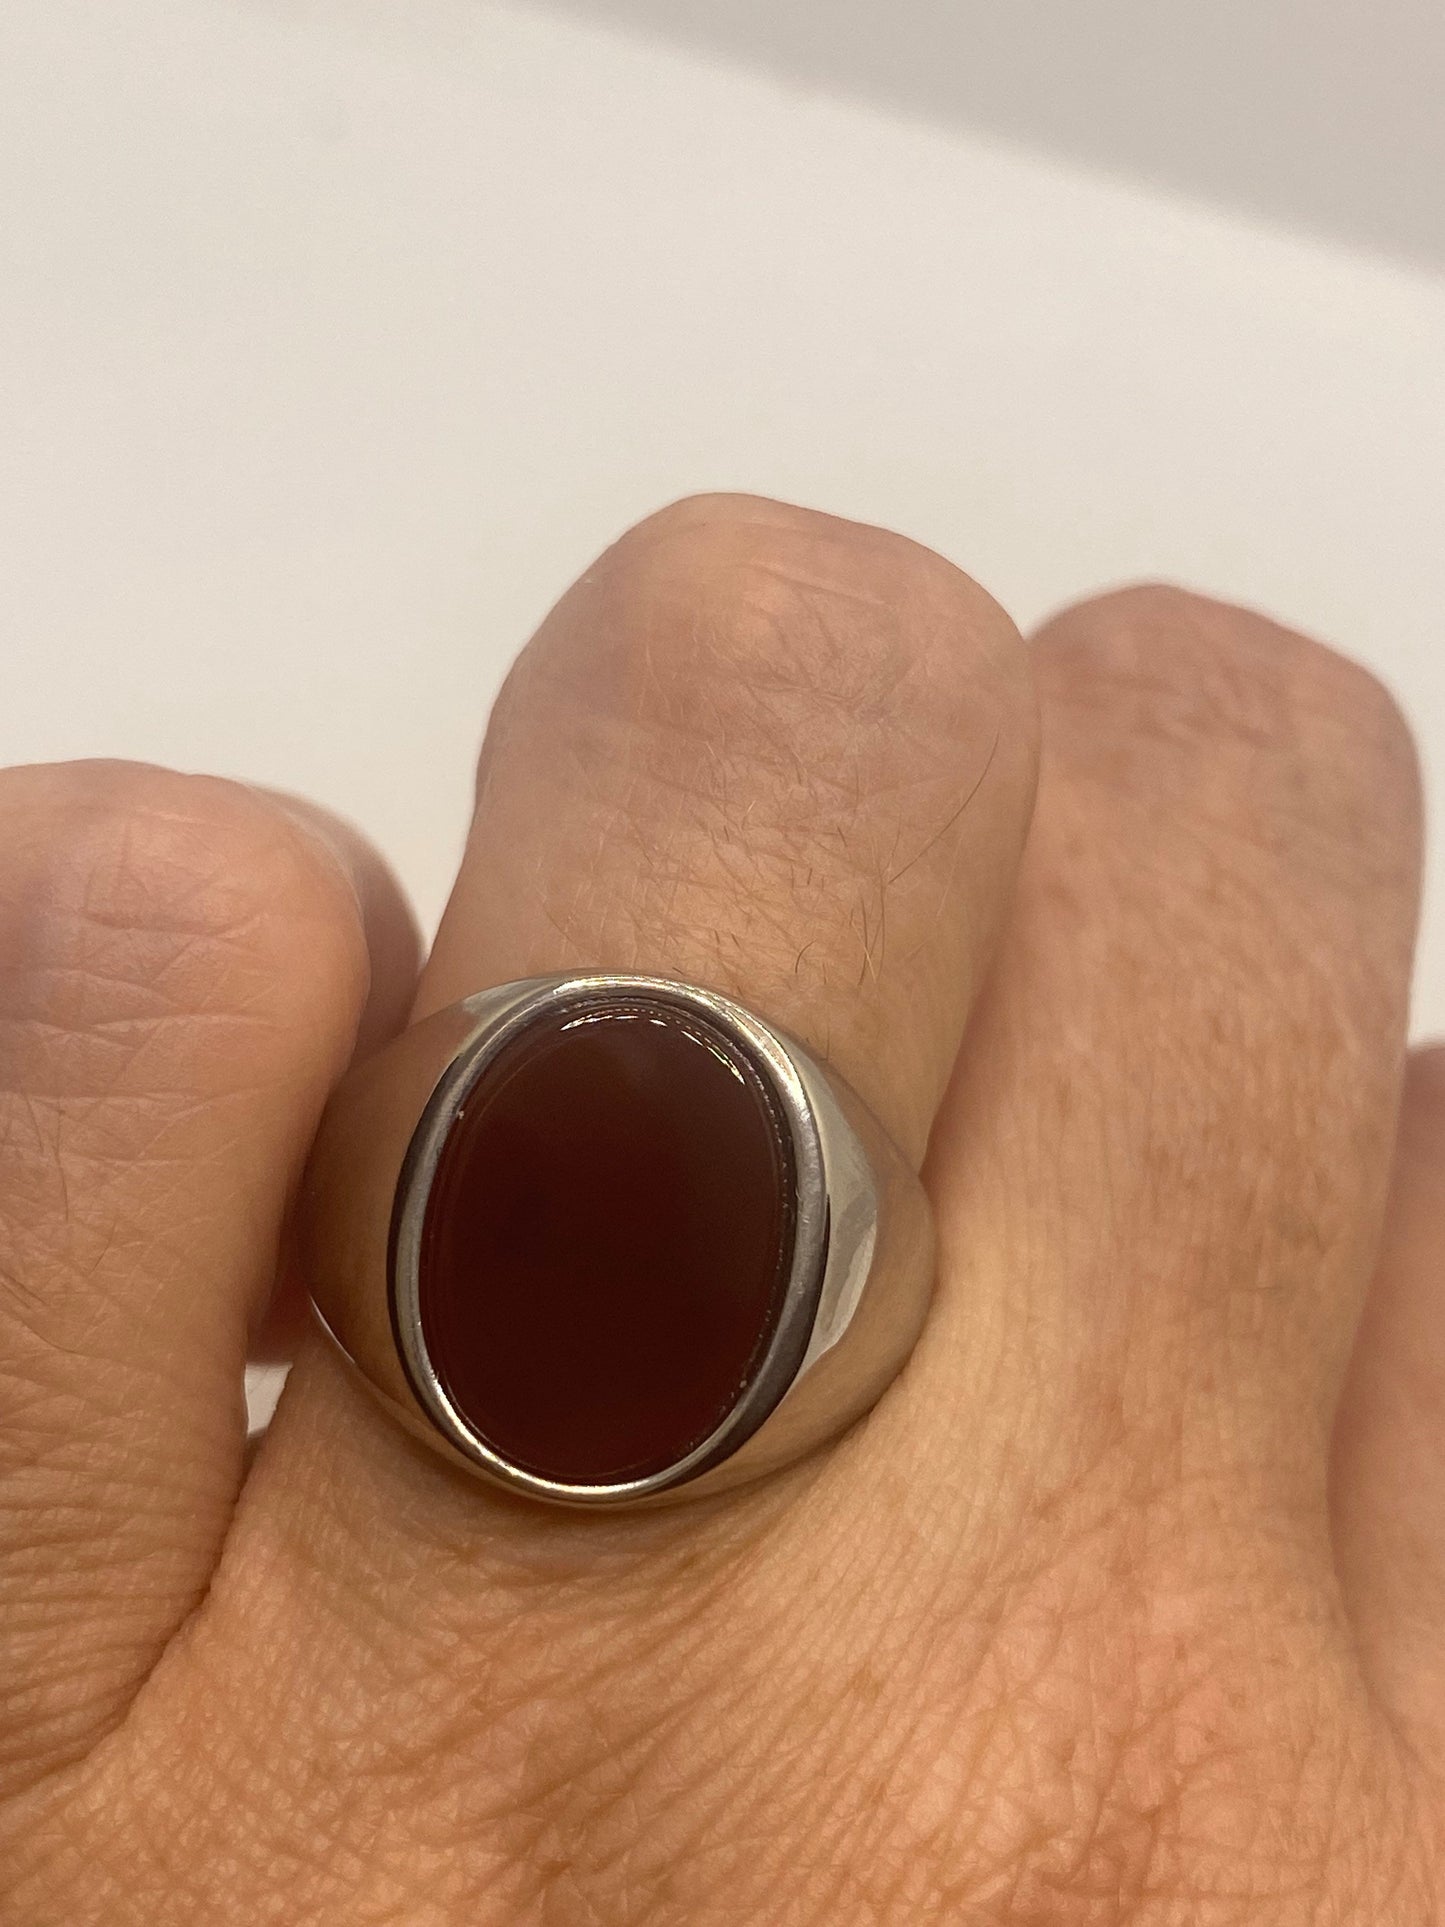 Vintage Red Carnelian Mens Ring Silver Stainless Steel